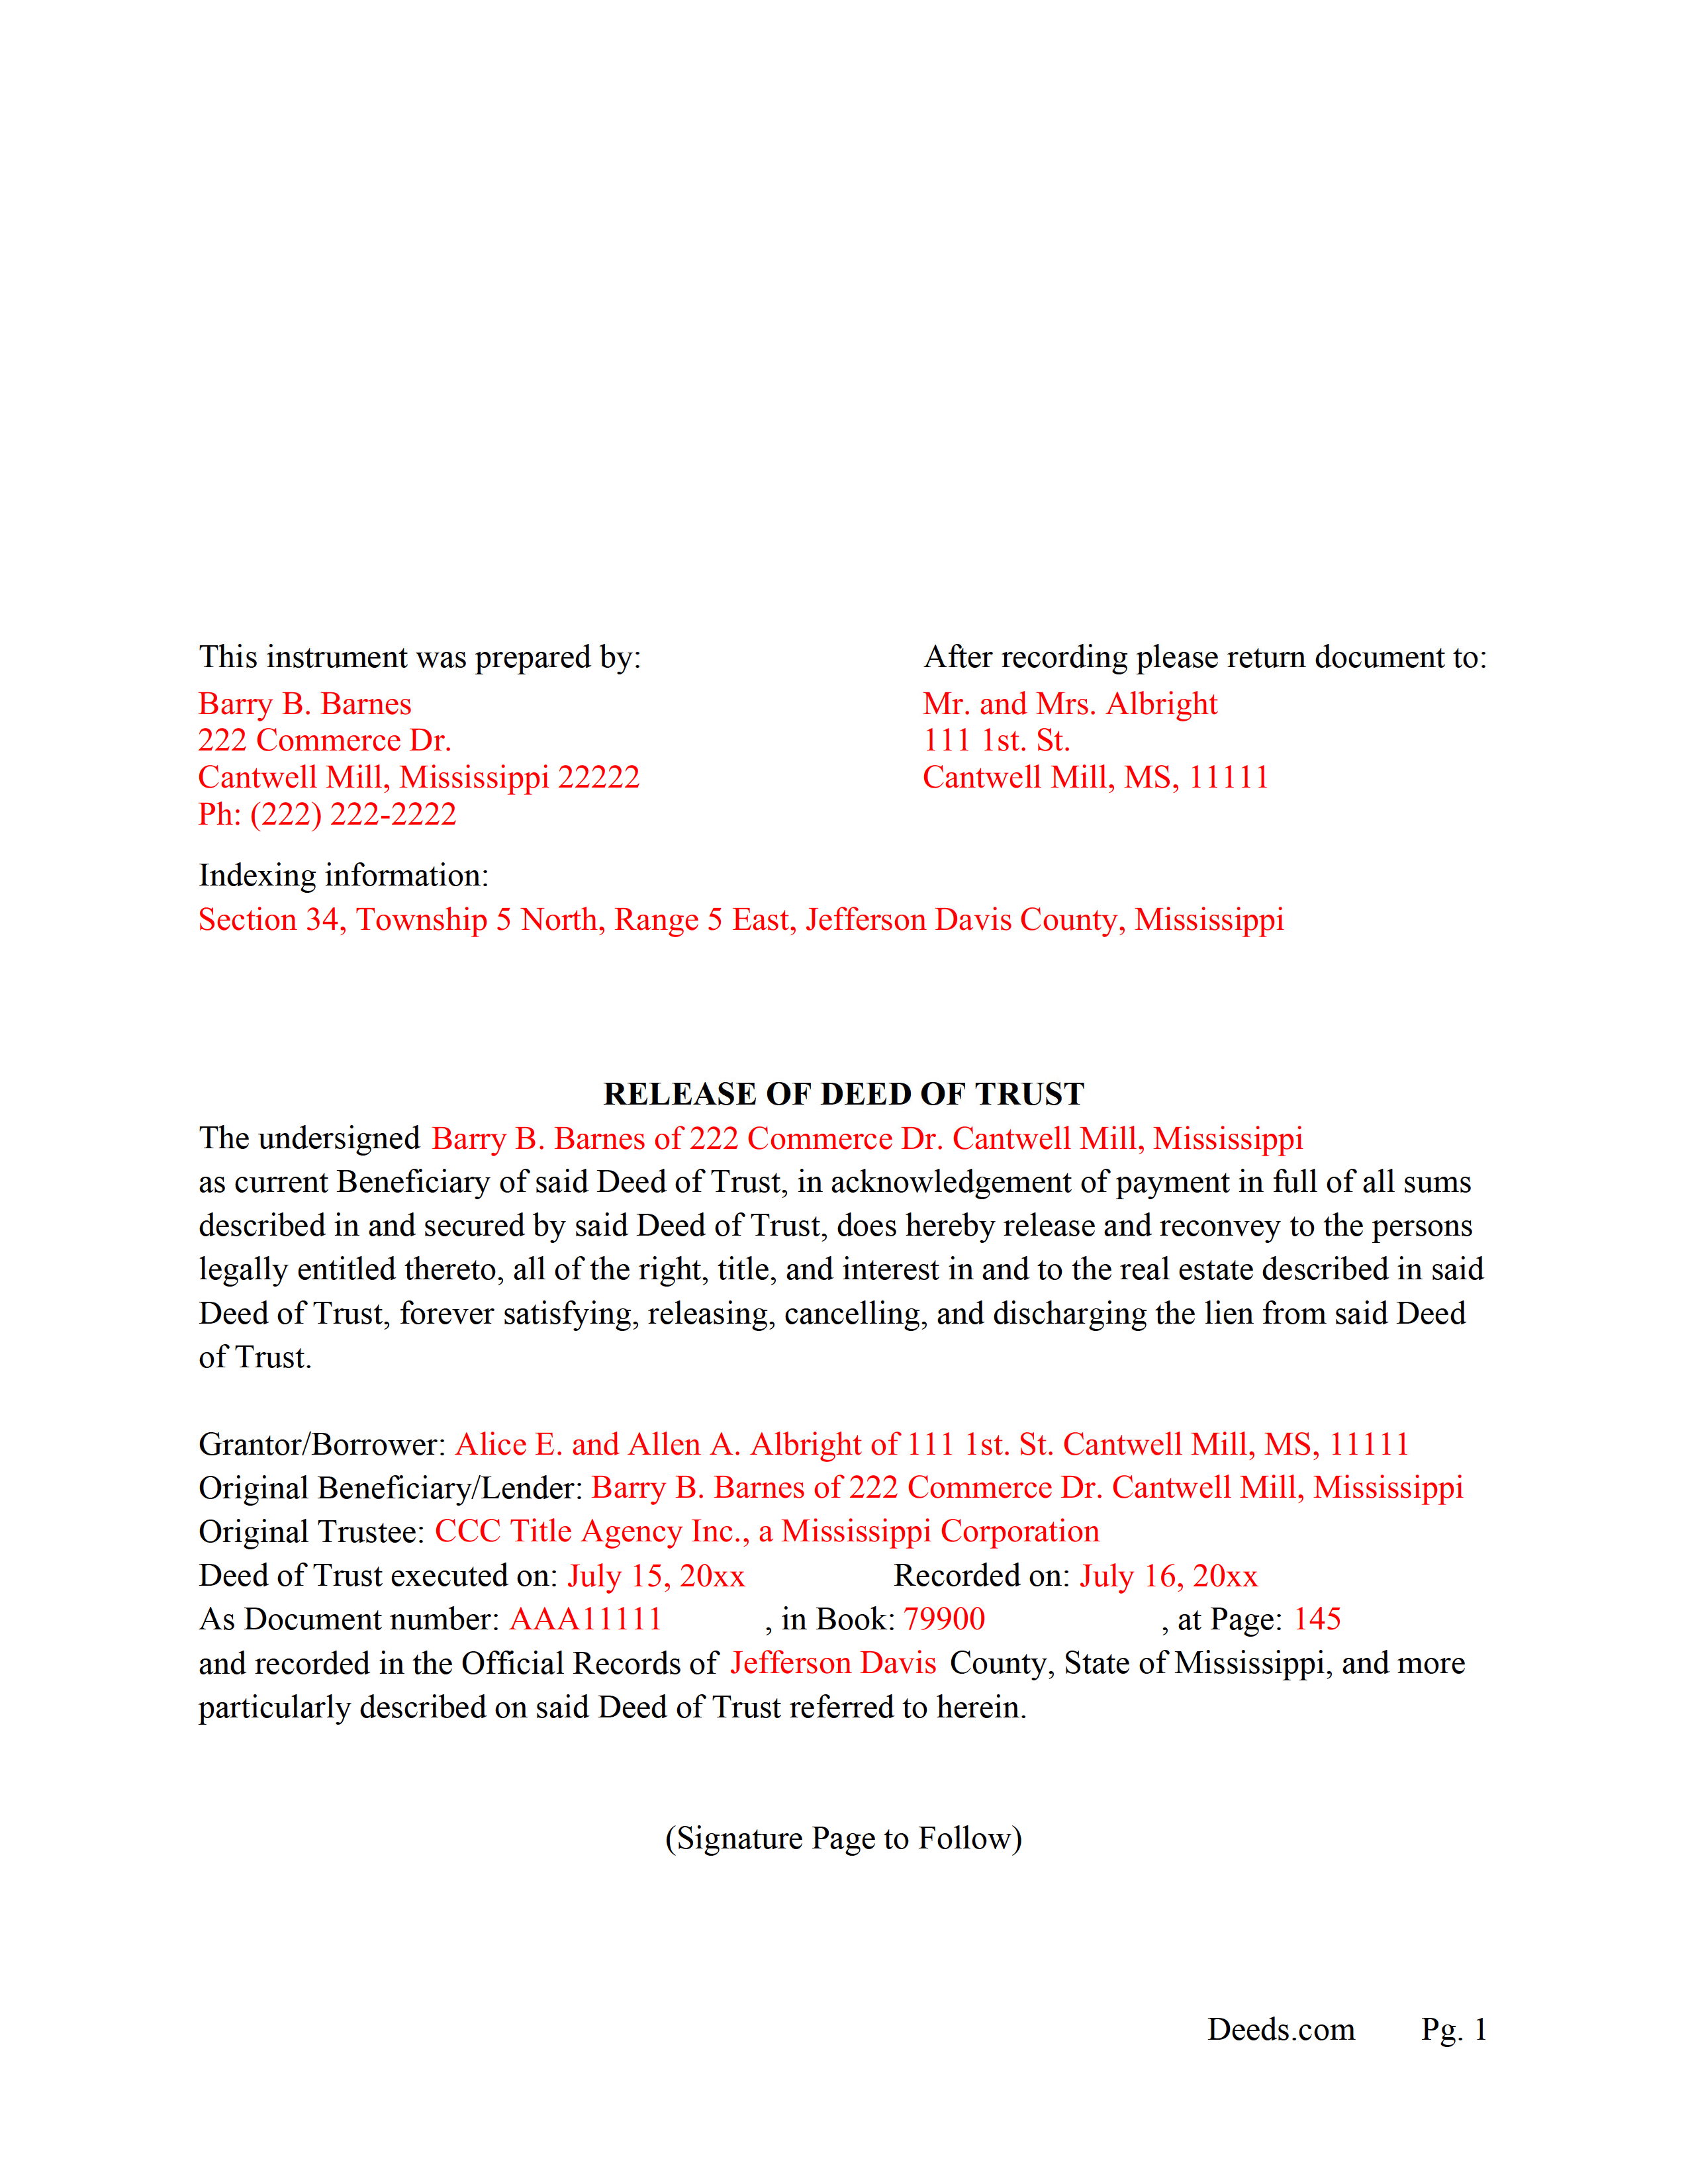 Completed Example of the Release of Deed of Trust